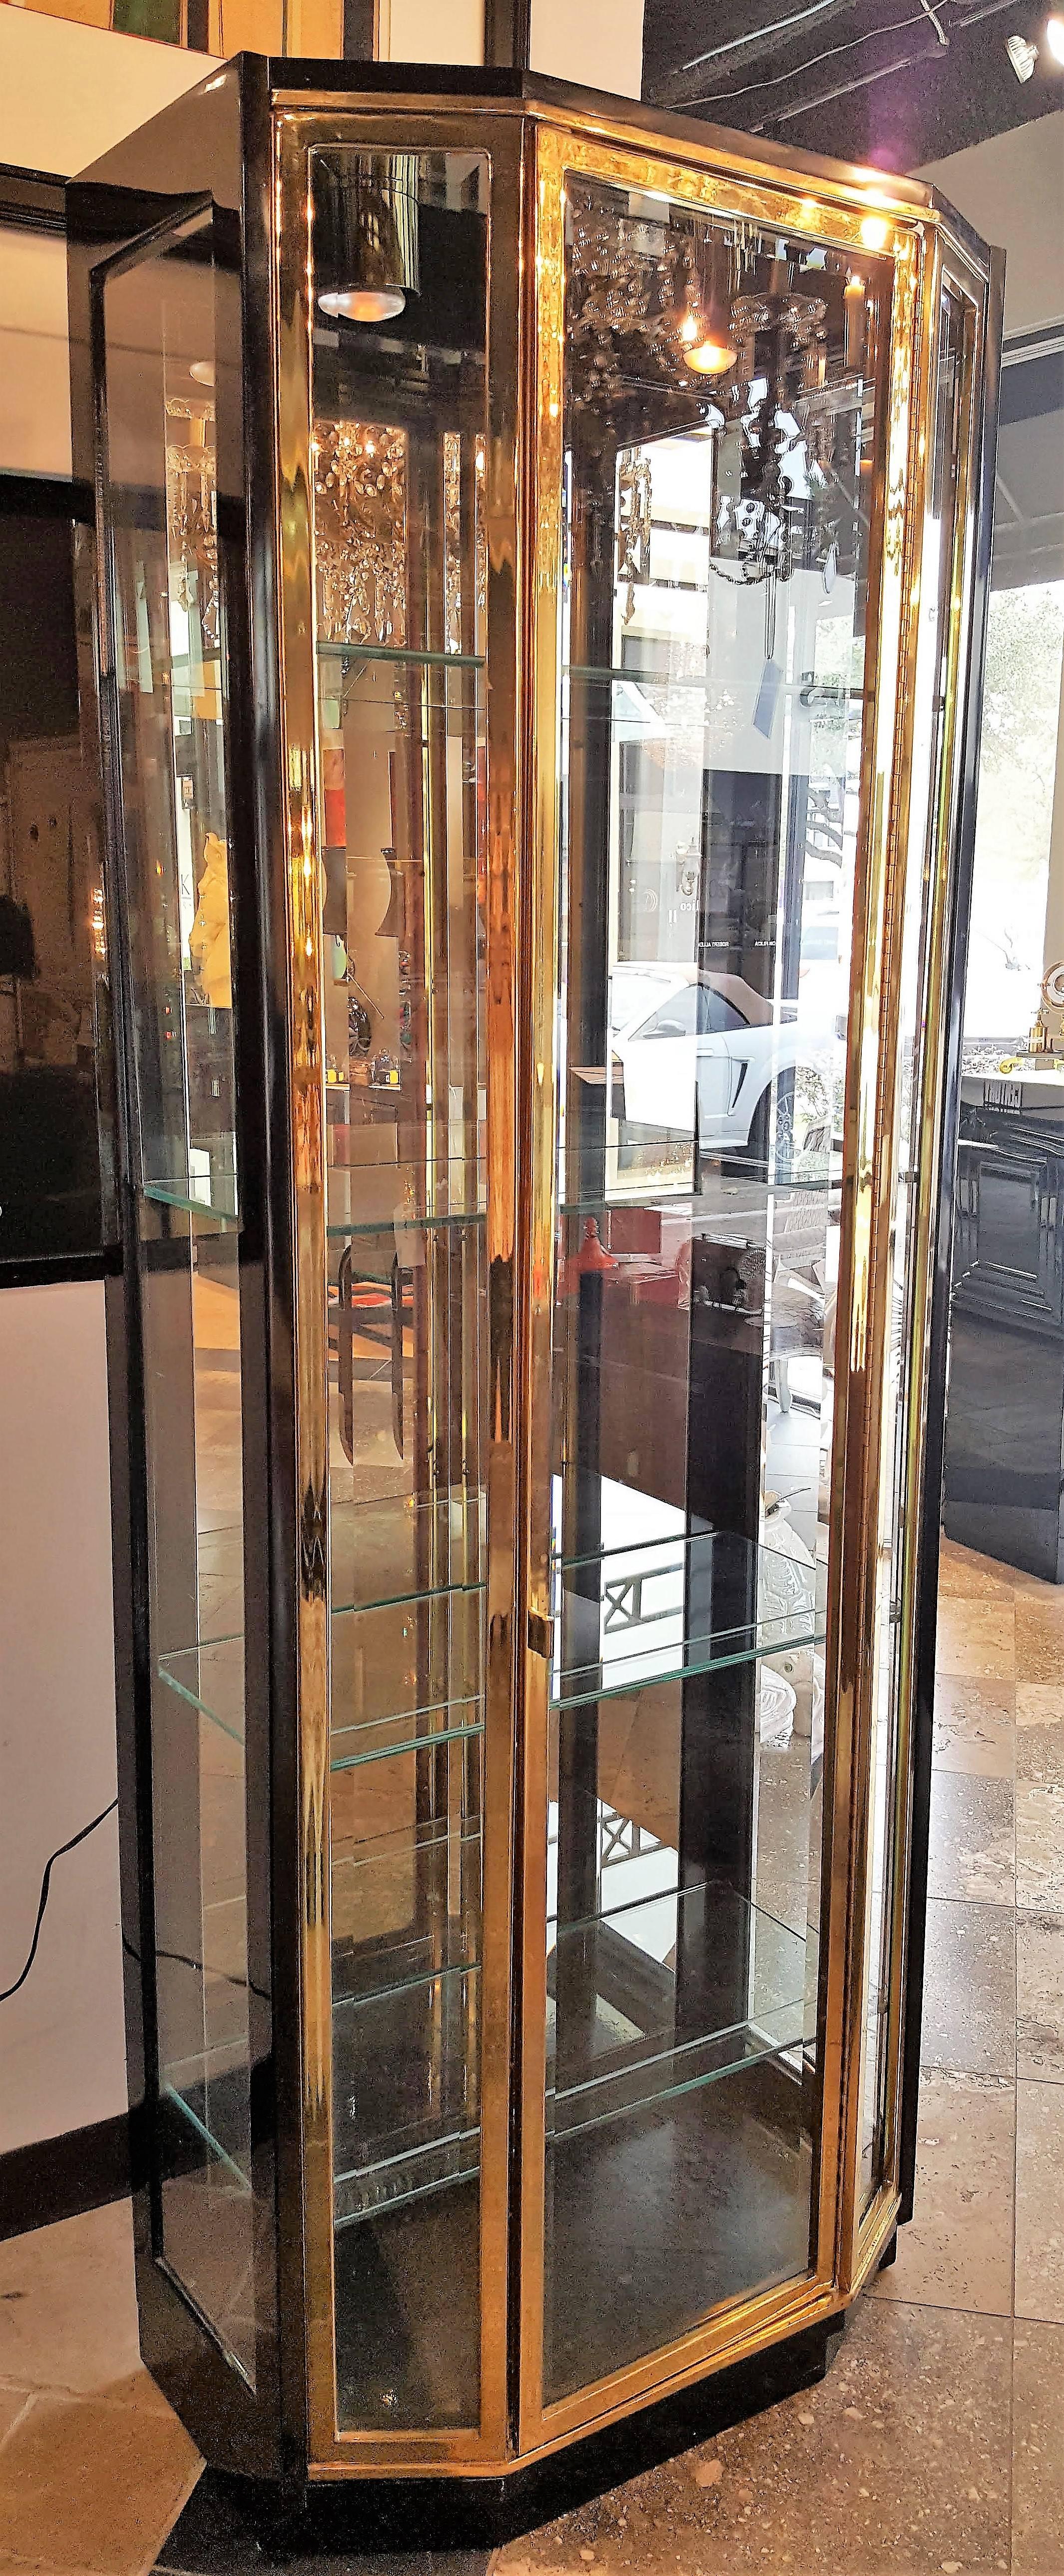 Pair tall 1970s brass display cabinets by Henredon. Beautiful pieces have four rectangular glass shelves, mirrored back wall, and lacquered wooden base. At the inside top of the case are two brass light holders. One door opens on brass hinge. Glass